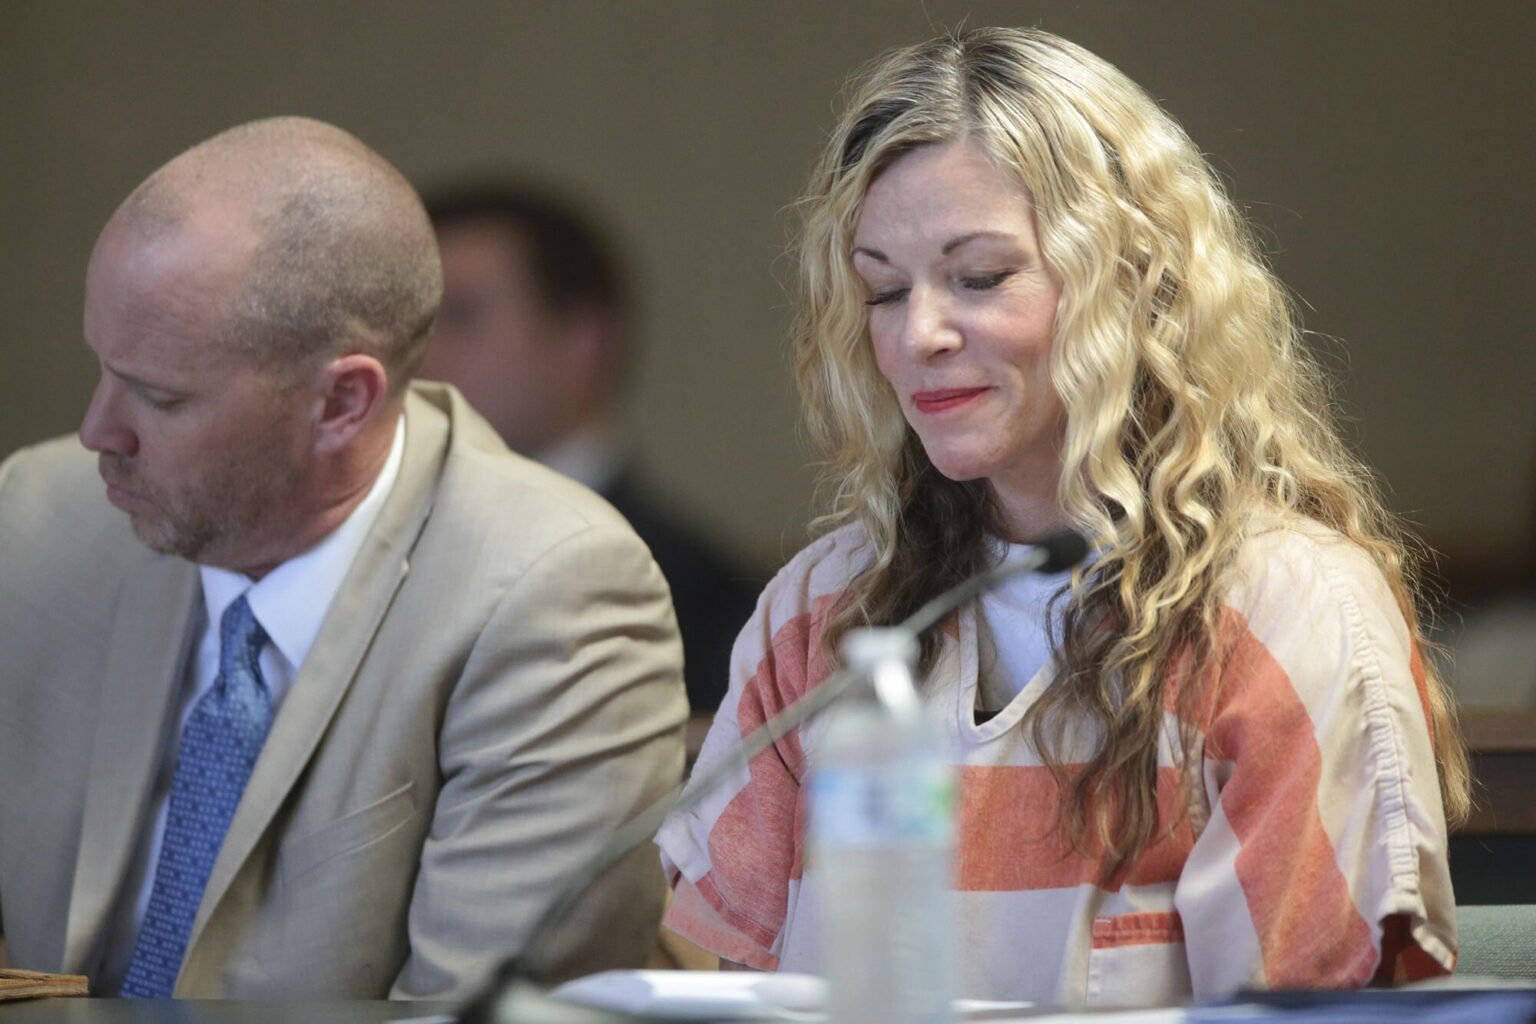 New evidence has emerged suggesting Lori Vallow-Daybell is guilty for murdering her last husband. Will she face new charges in court?